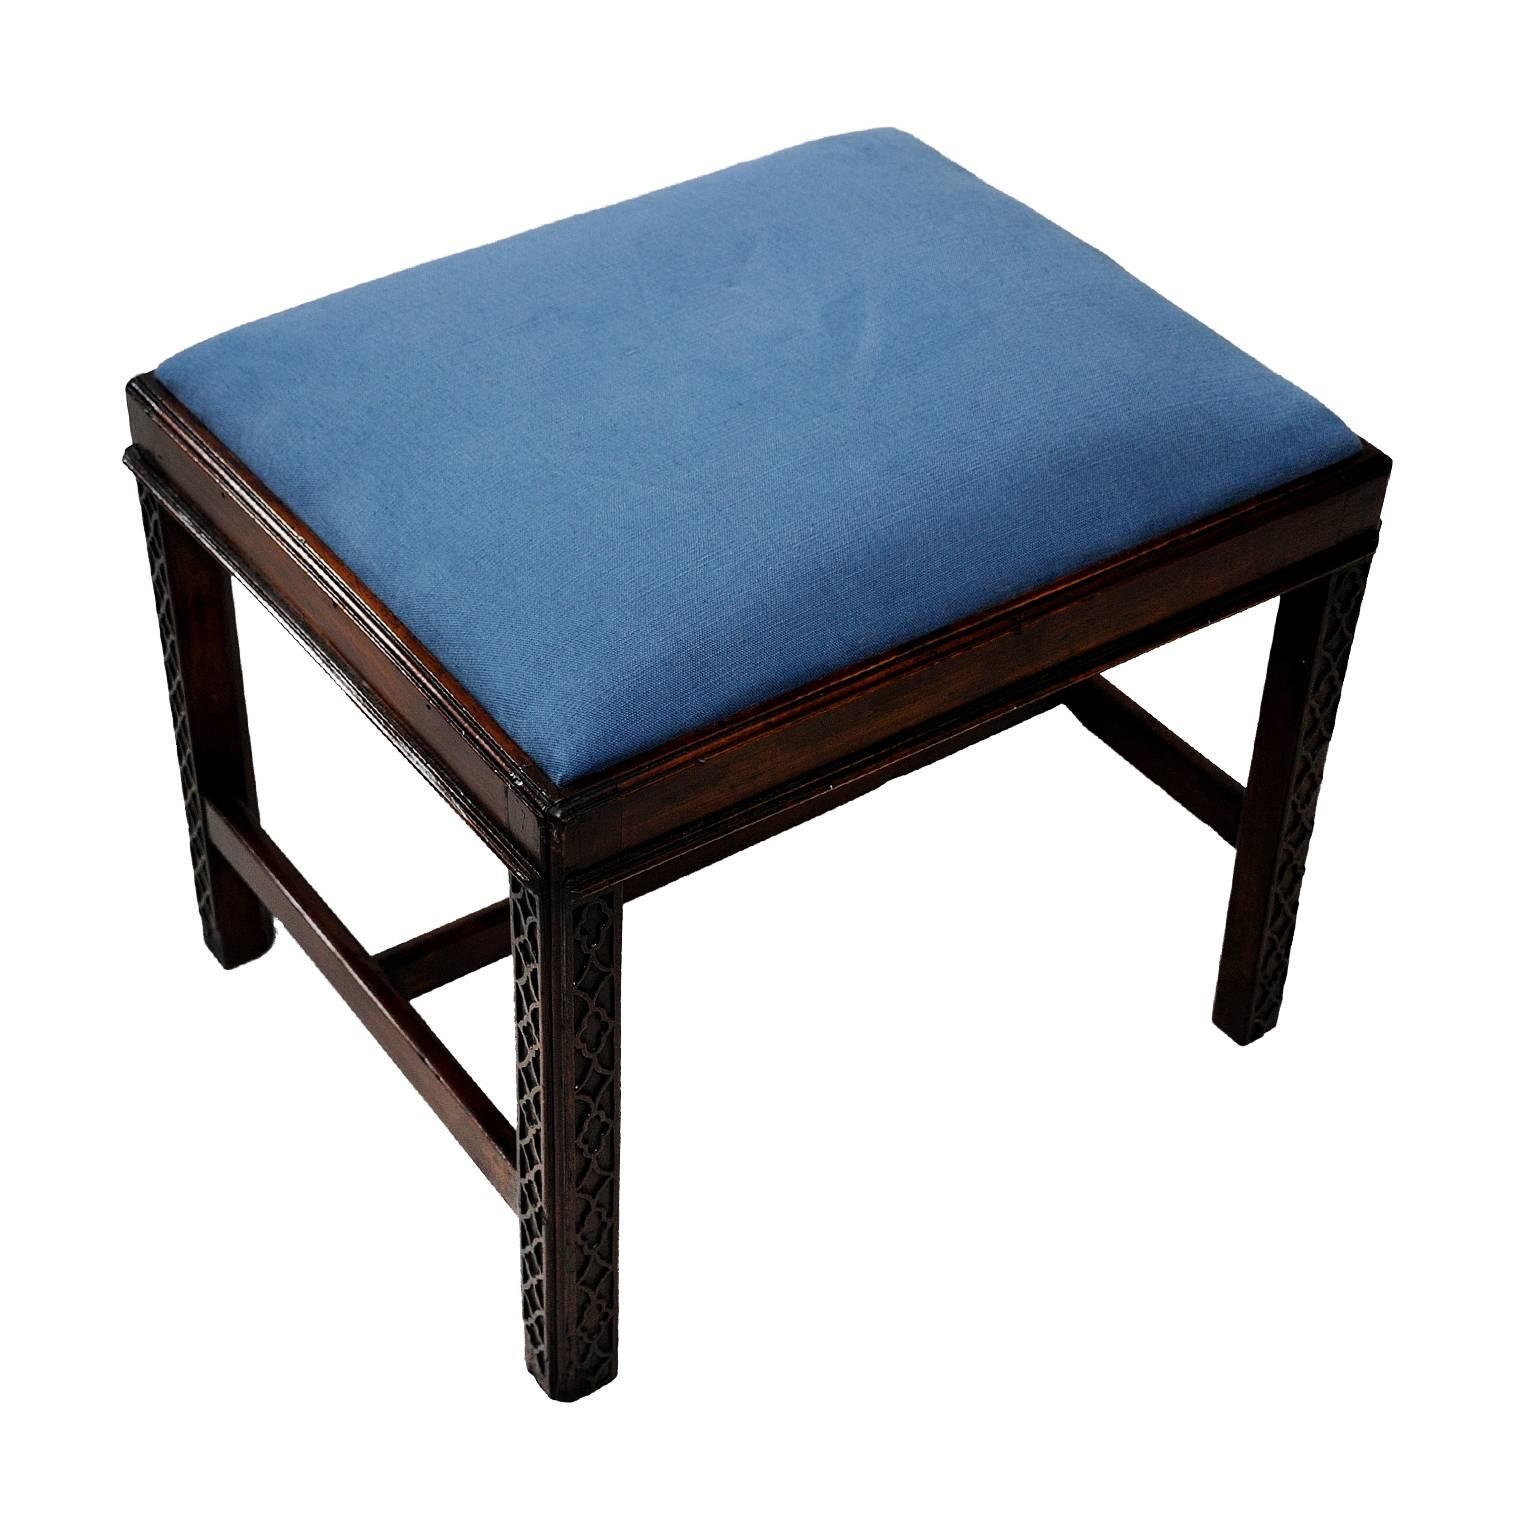 This is a rather lovely English mid-18th century George III mahogany Chippendale style stool, featuring blind fret decoration to the legs and upholstered in beautifully complimentary blue Scottish linen, circa 1760.